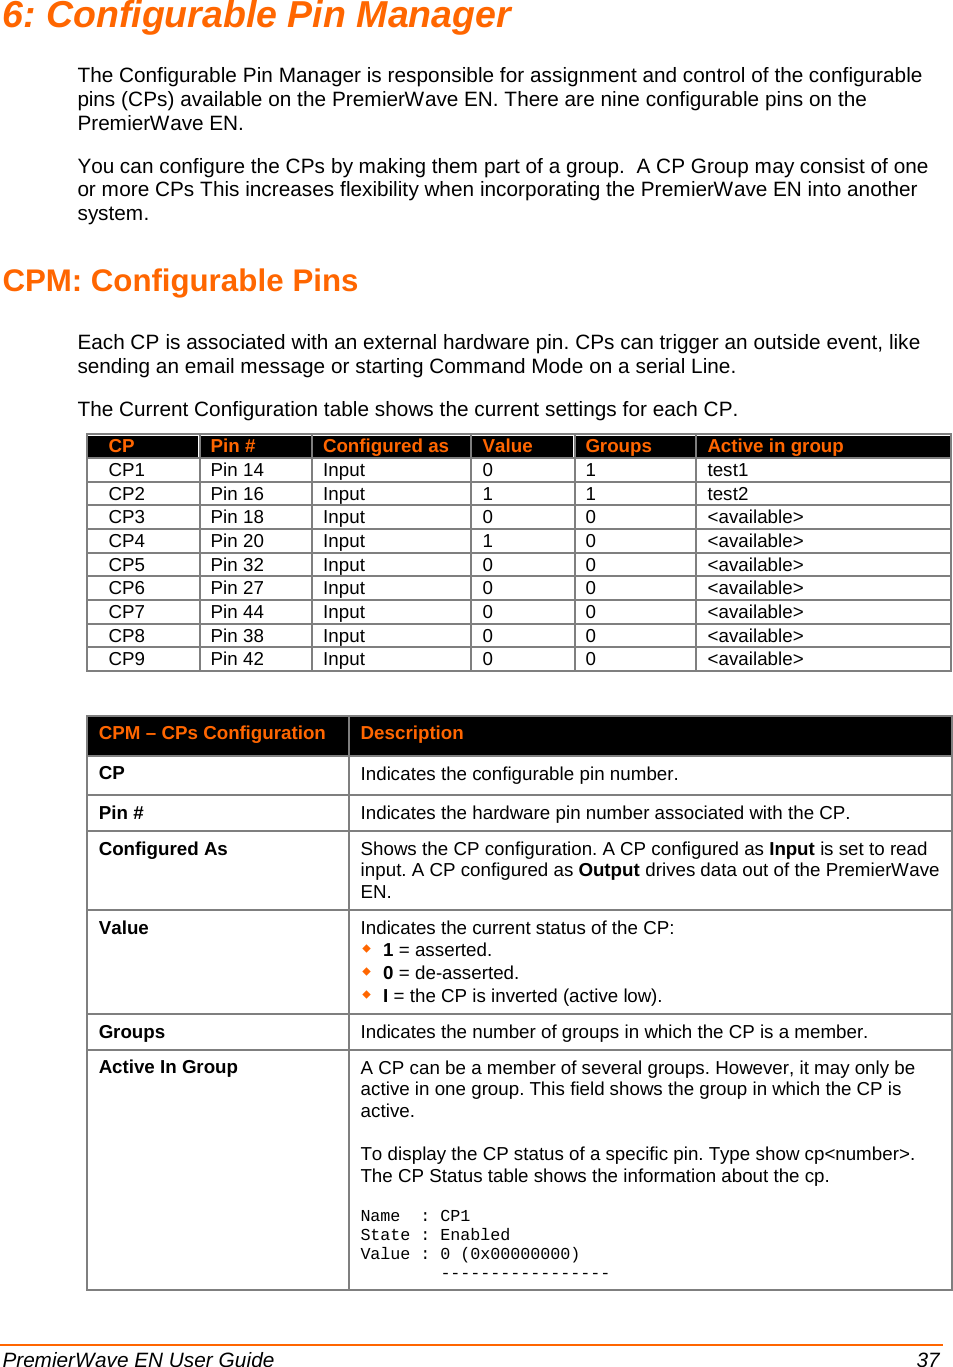  PremierWave EN User Guide    37 6: Configurable Pin Manager The Configurable Pin Manager is responsible for assignment and control of the configurable pins (CPs) available on the PremierWave EN. There are nine configurable pins on the PremierWave EN. You can configure the CPs by making them part of a group.  A CP Group may consist of one or more CPs This increases flexibility when incorporating the PremierWave EN into another system.  CPM: Configurable Pins Each CP is associated with an external hardware pin. CPs can trigger an outside event, like sending an email message or starting Command Mode on a serial Line. The Current Configuration table shows the current settings for each CP.   CP Pin # Configured as Value Groups Active in group   CP1 Pin 14 Input 0 1 test1   CP2 Pin 16 Input 1 1 test2   CP3 Pin 18 Input 0 0 &lt;available&gt;   CP4 Pin 20 Input 1 0 &lt;available&gt;   CP5 Pin 32 Input 0 0 &lt;available&gt;   CP6 Pin 27 Input 0 0 &lt;available&gt;   CP7 Pin 44 Input 0 0 &lt;available&gt;   CP8 Pin 38 Input 0 0 &lt;available&gt;   CP9 Pin 42 Input 0 0 &lt;available&gt;  CPM – CPs Configuration Description CP Indicates the configurable pin number. Pin # Indicates the hardware pin number associated with the CP. Configured As Shows the CP configuration. A CP configured as Input is set to read input. A CP configured as Output drives data out of the PremierWave EN.  Value Indicates the current status of the CP:  1 = asserted.  0 = de-asserted.  I = the CP is inverted (active low).  Groups Indicates the number of groups in which the CP is a member. Active In Group      A CP can be a member of several groups. However, it may only be active in one group. This field shows the group in which the CP is active.  To display the CP status of a specific pin. Type show cp&lt;number&gt;. The CP Status table shows the information about the cp.  Name  : CP1 State : Enabled Value : 0 (0x00000000)         -----------------      